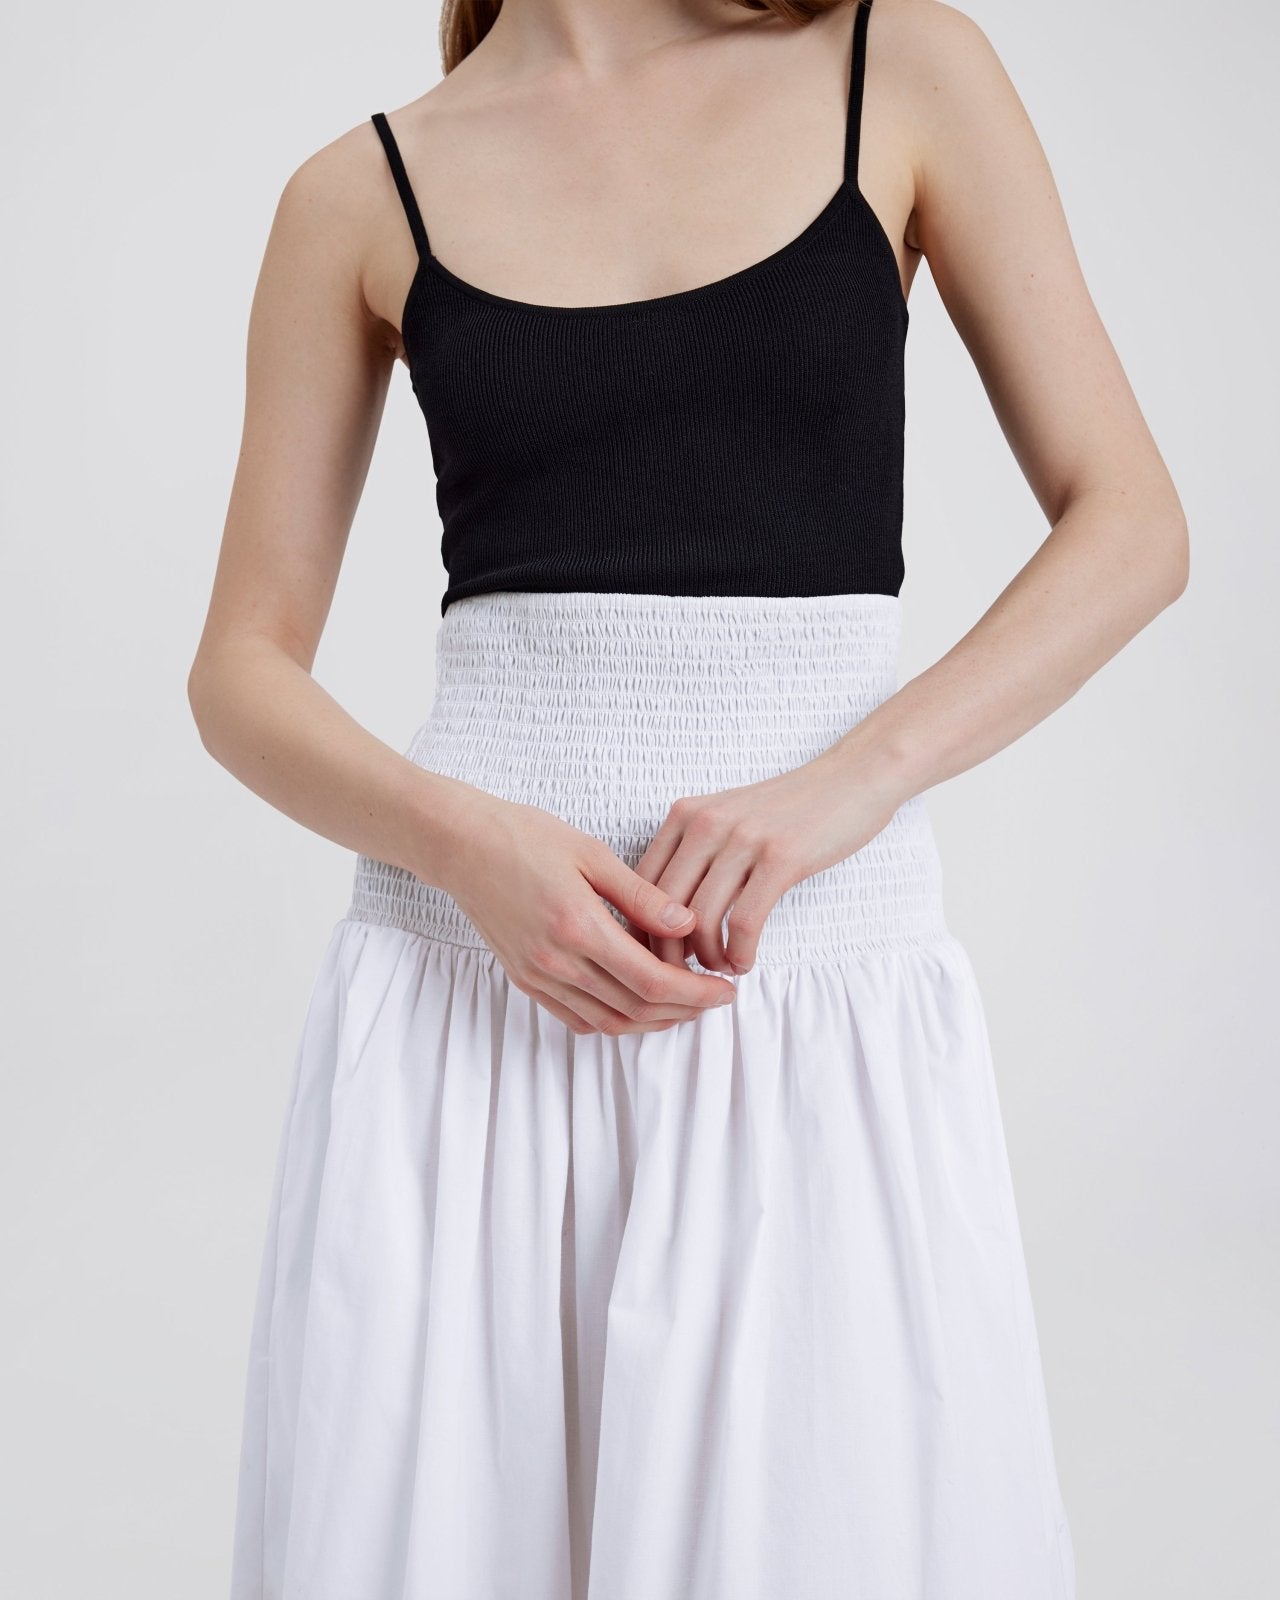 The Zaria Skirt - Solid & Striped